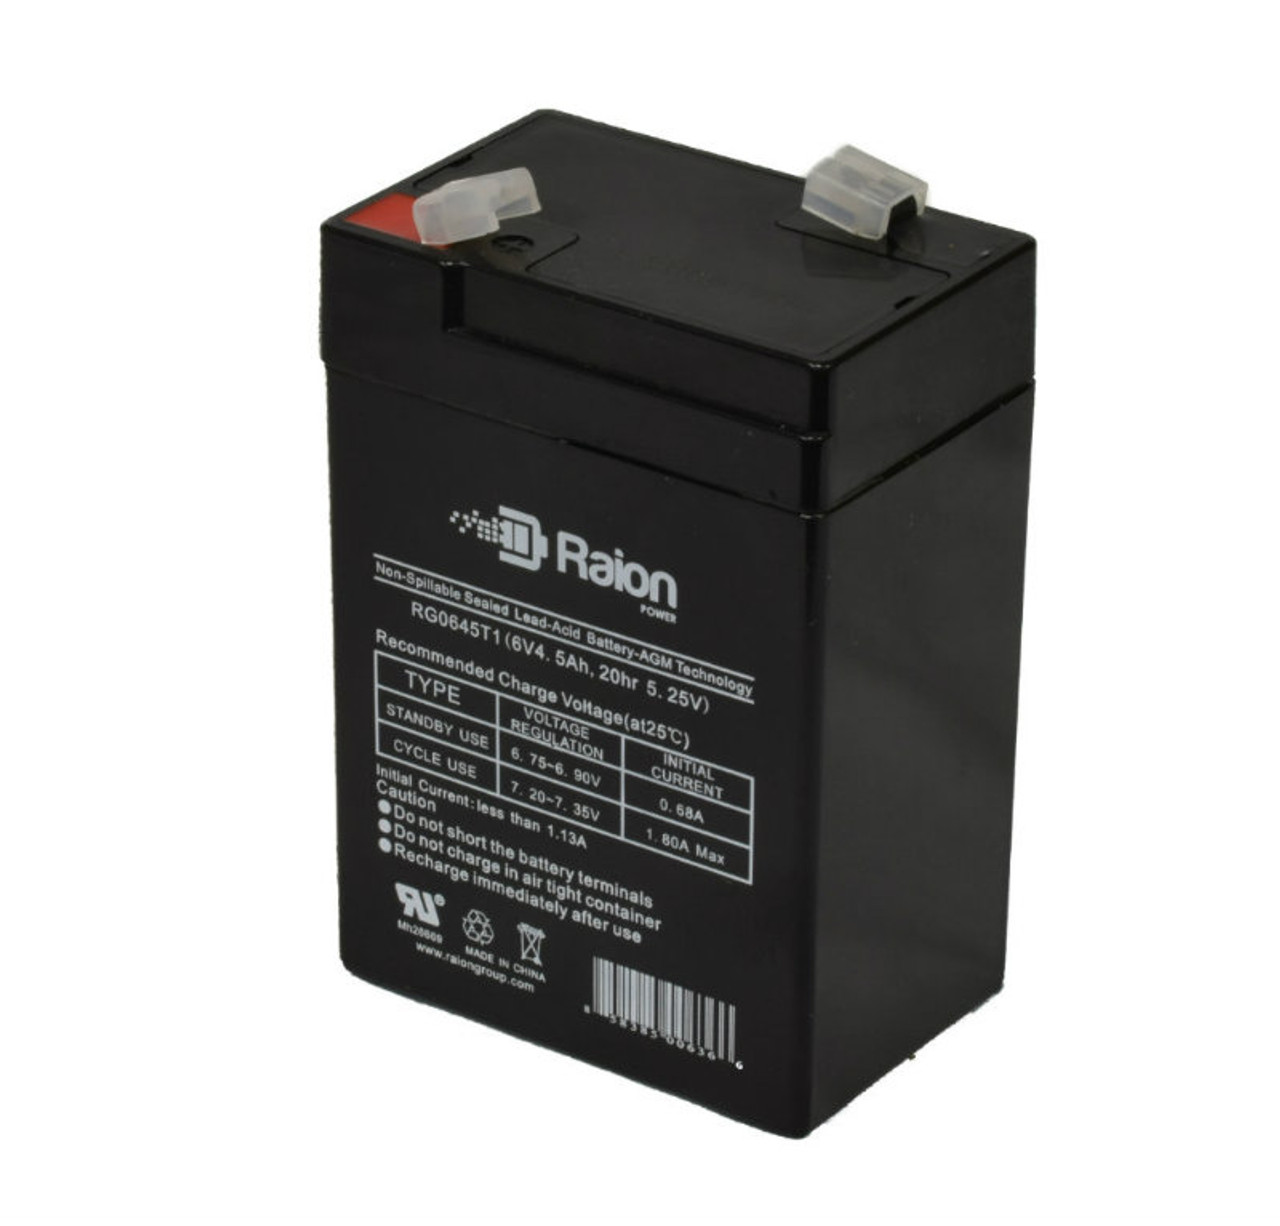 Raion Power RG0645T1 6V 4.5Ah Replacement Battery Cartridge for Edwards 1662B